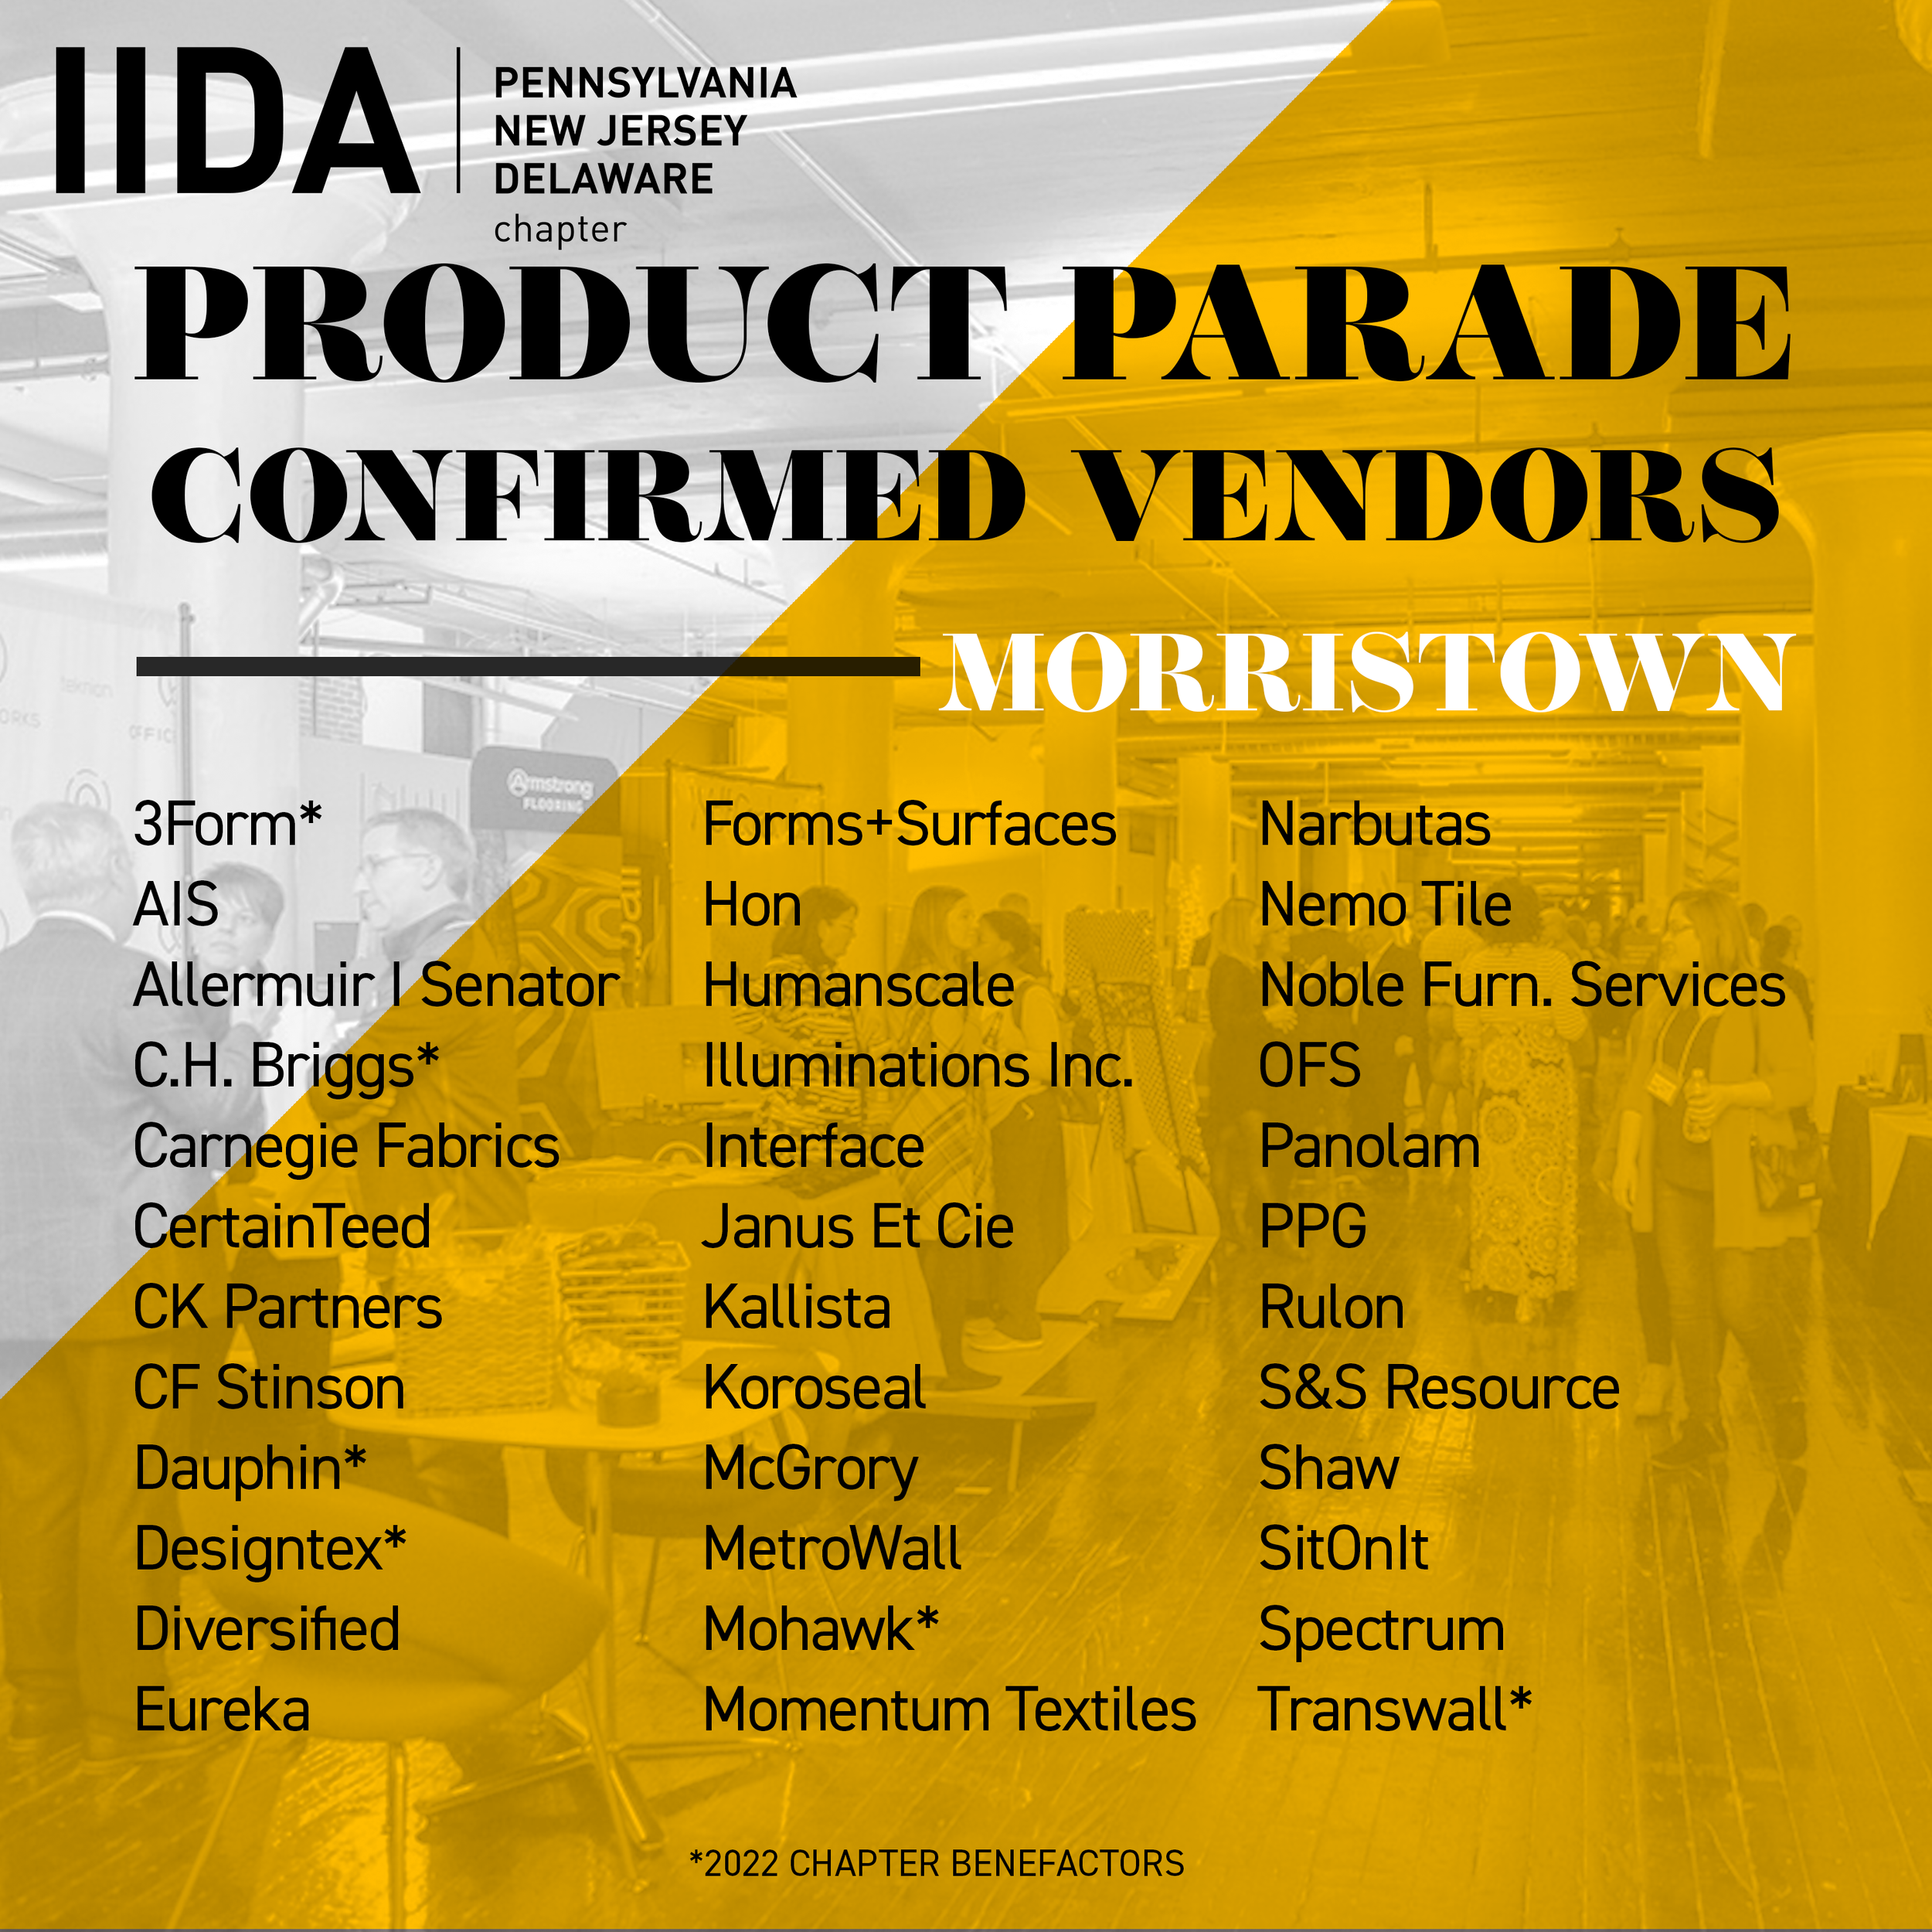 2022_ProductParade_Morristown_Vendors.png